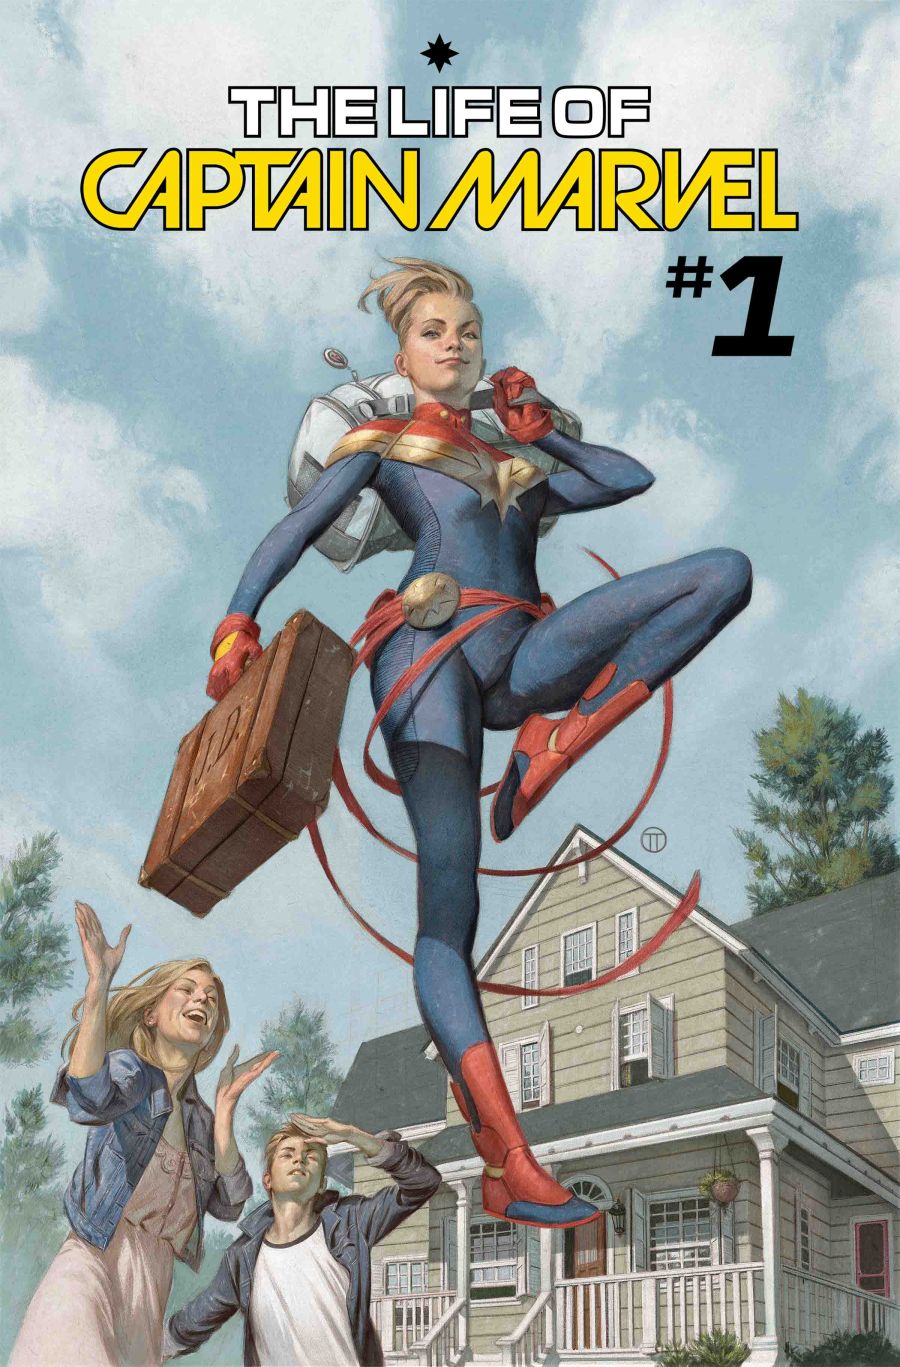 THE LIFE OF CAPTAIN MARVEL #1 (of 5)